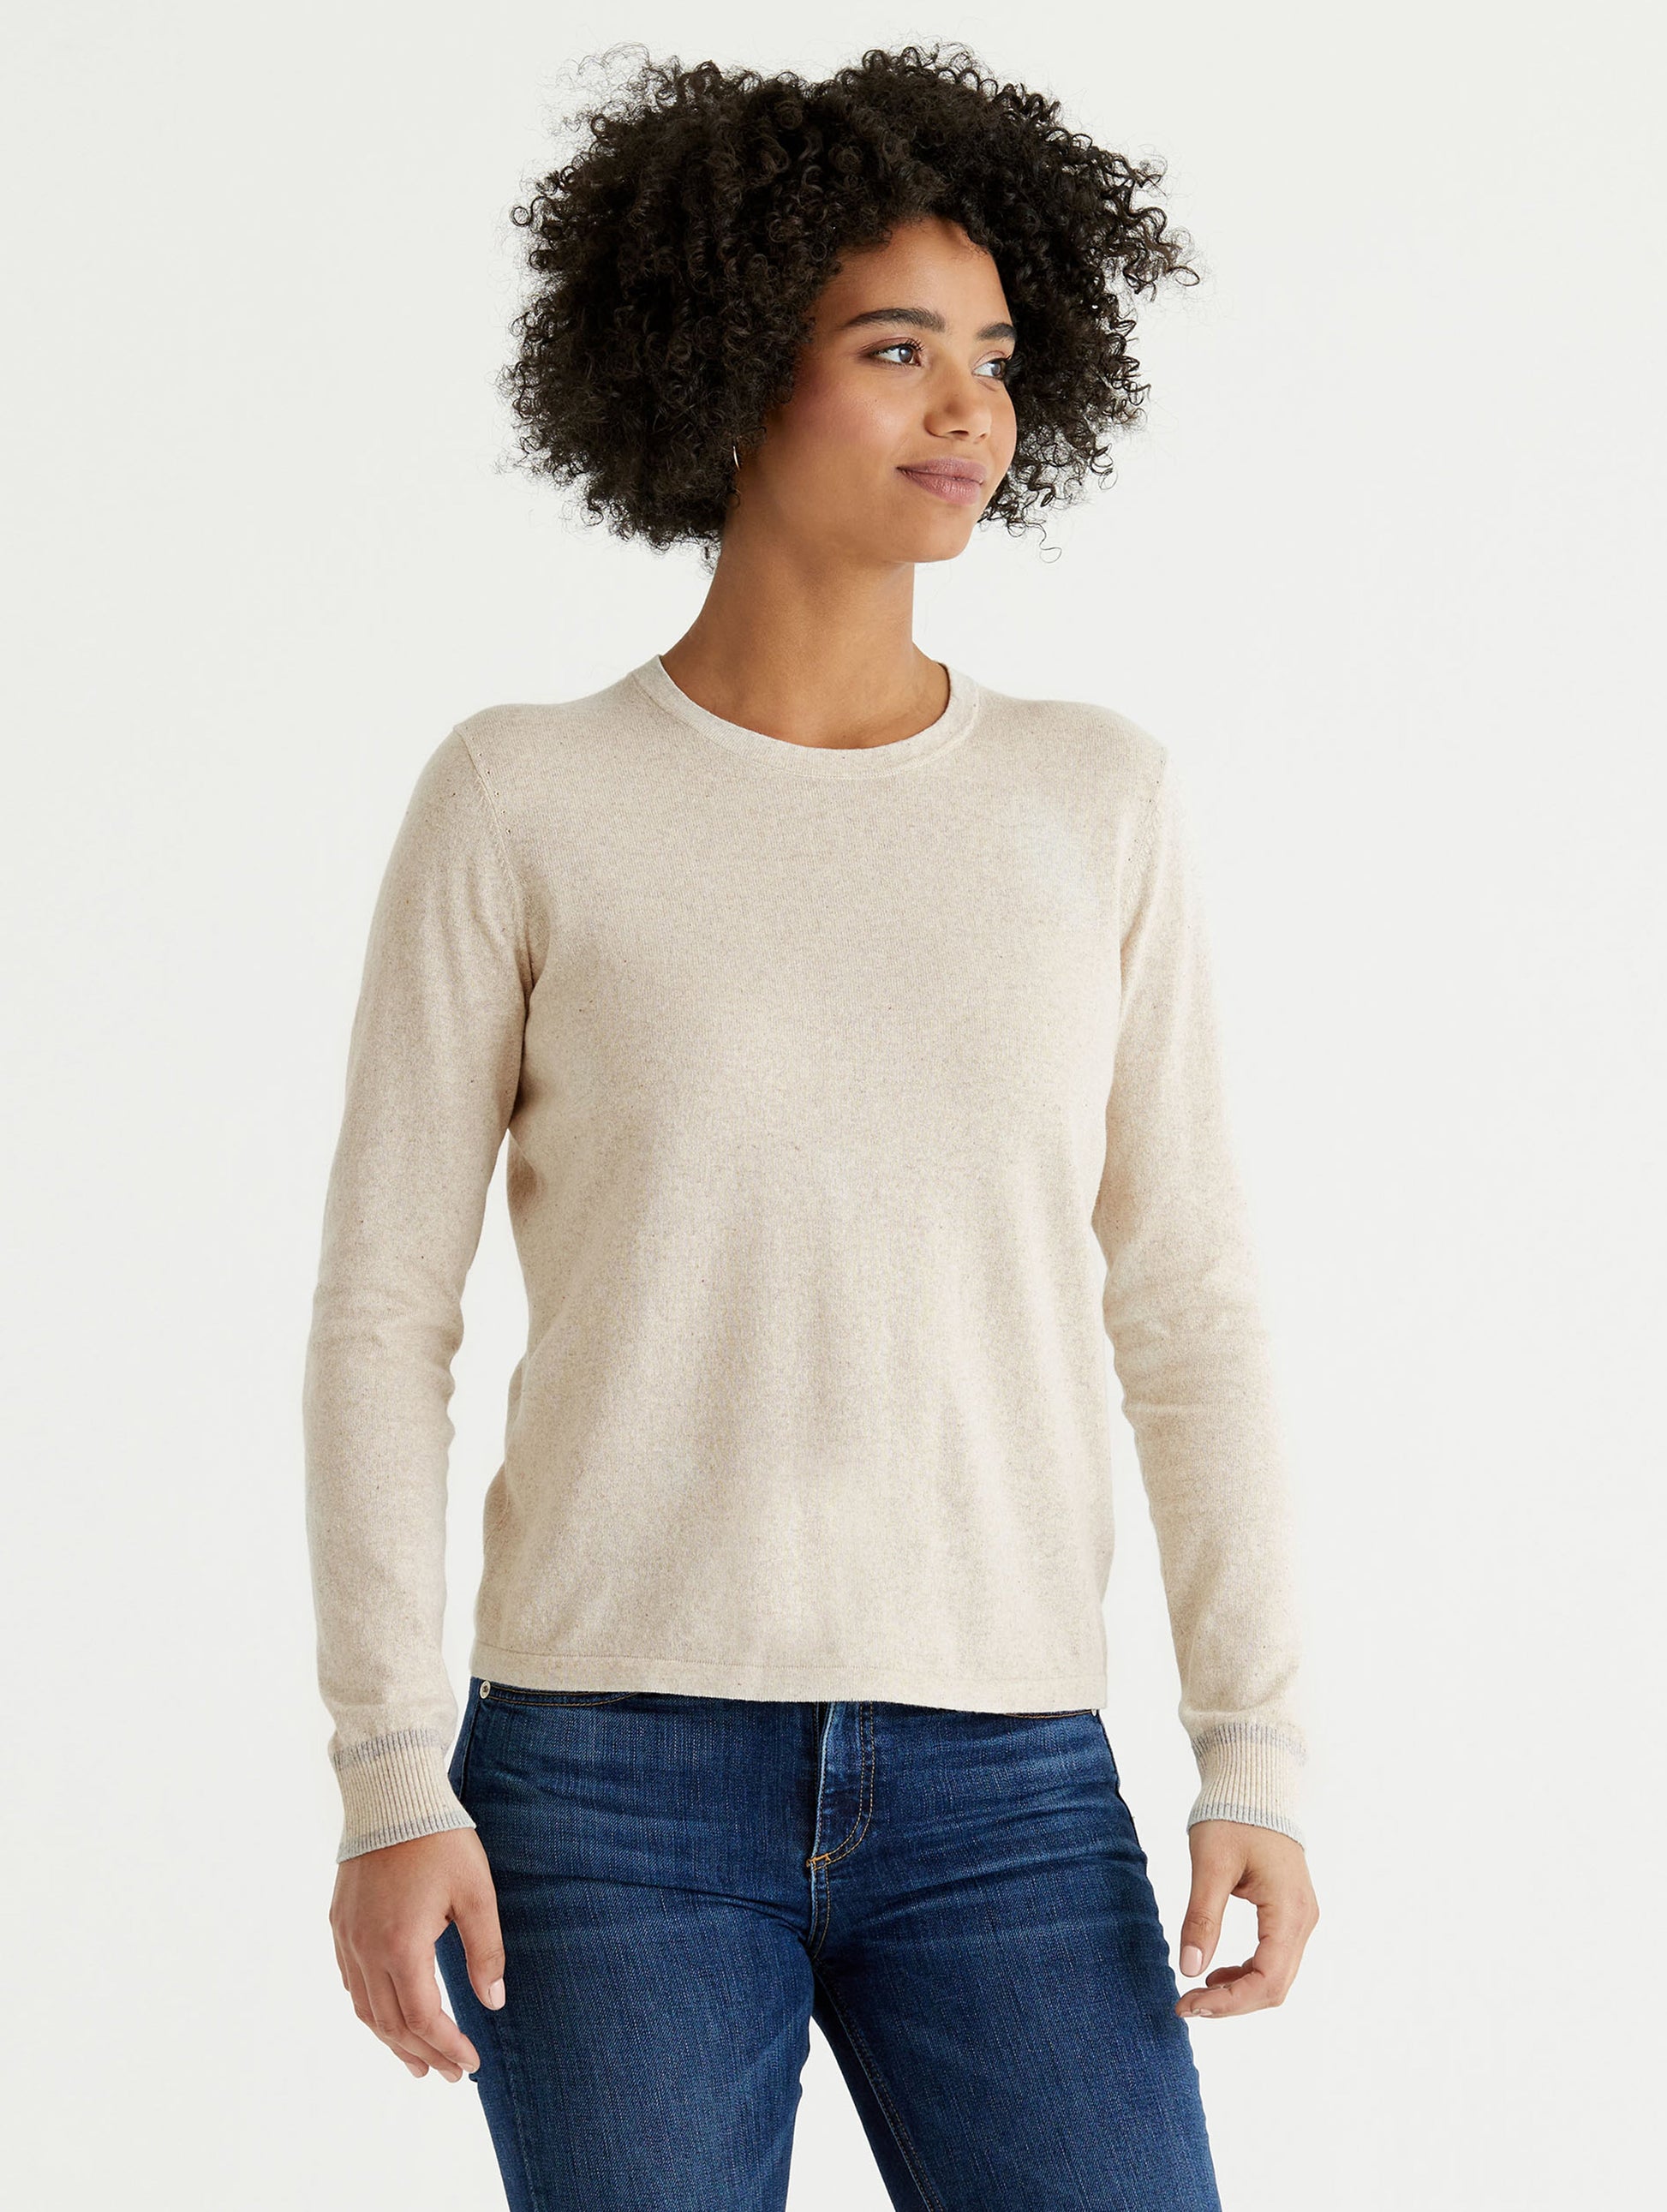 beige sweater for women from Aether Apparel